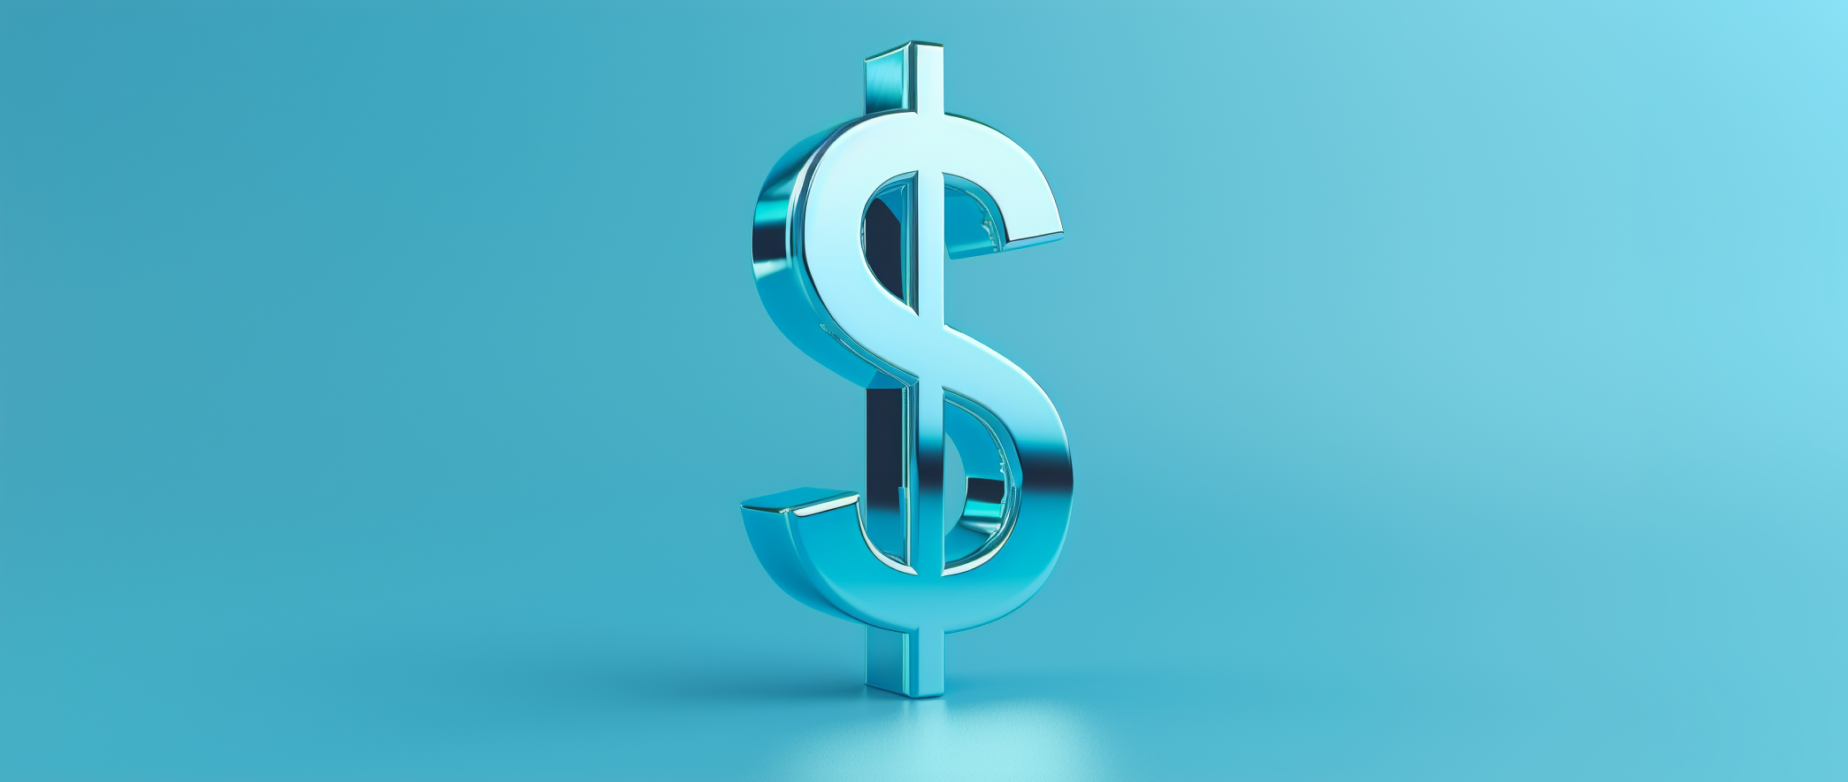 A blue 3D US dollar sign on a blue background.